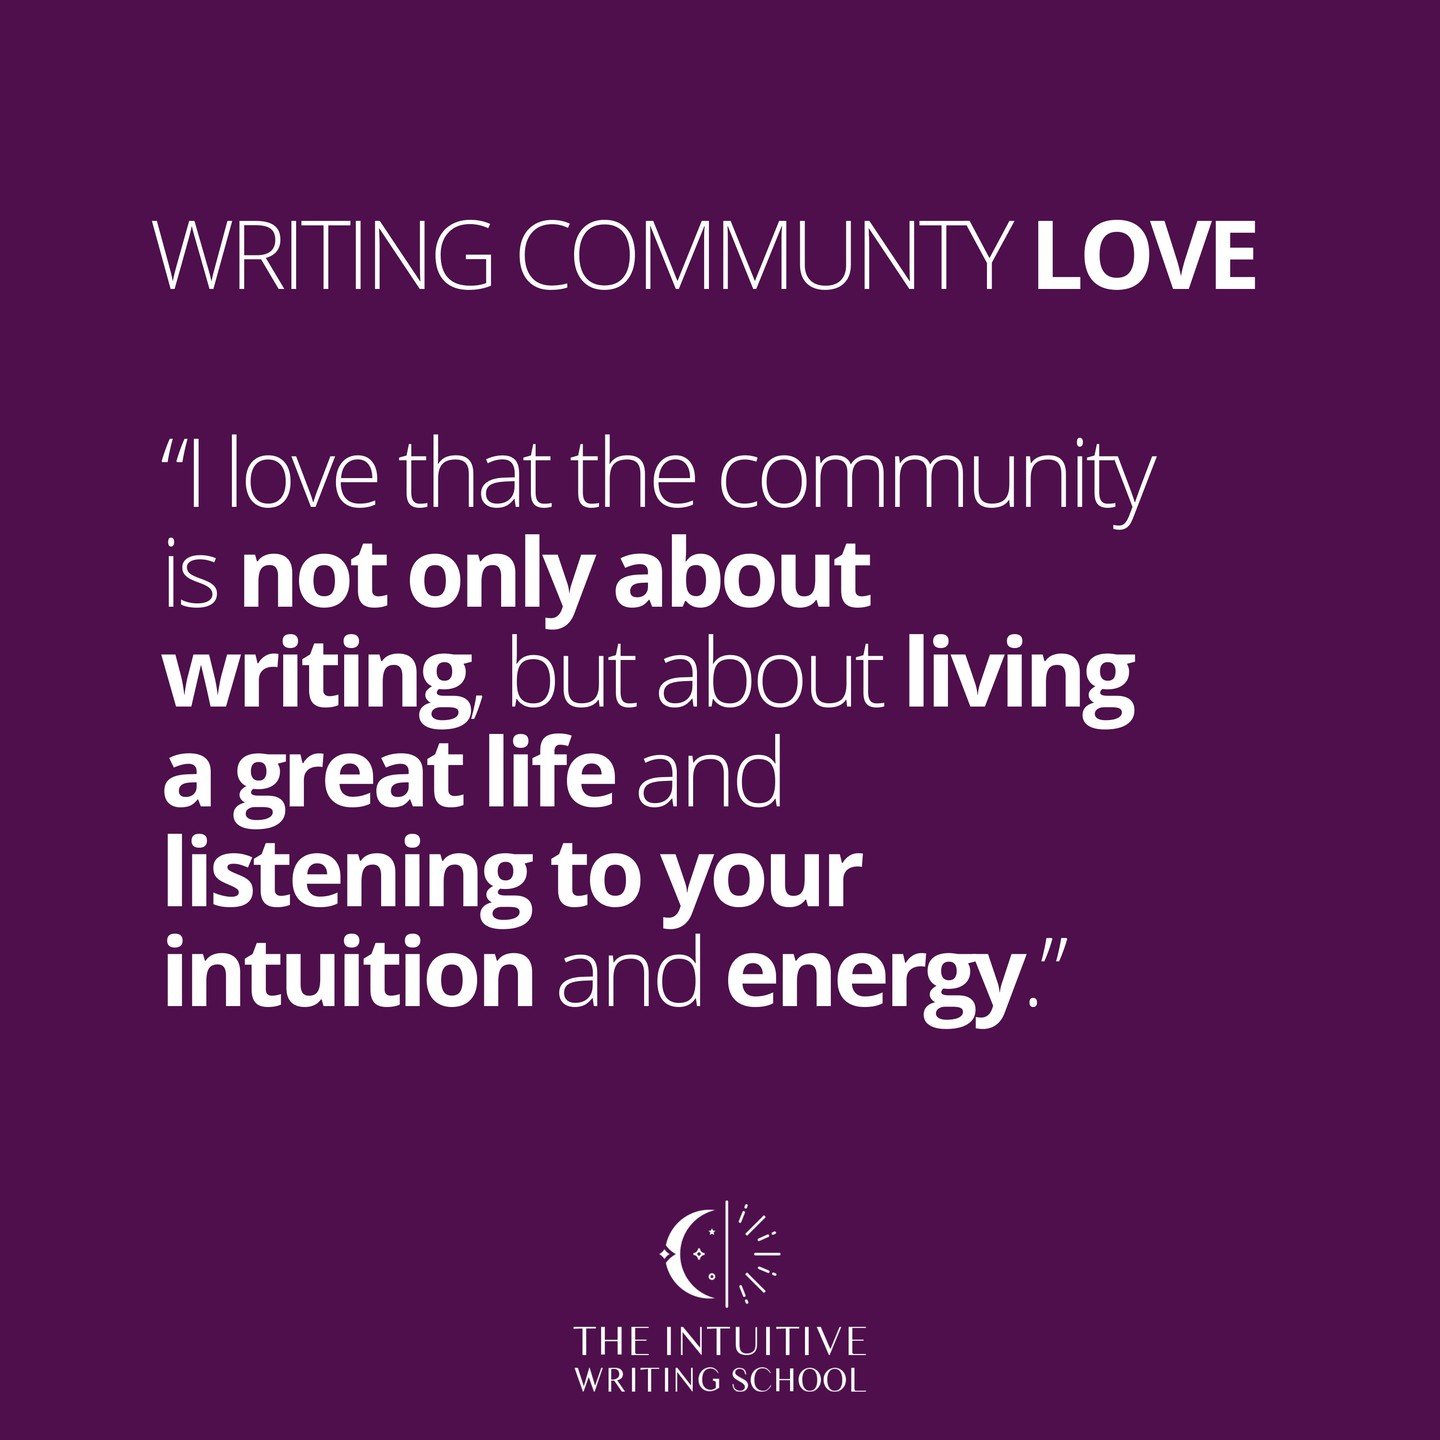 YES! 
All the writing groups I'd explored in the past were about one thing... WRITING. 

zzzz

Snoozefest. 

Yes, I LOVE writing. 

I love talking about writing, connecting with business owners and authors about their writing, and inspiring and teach